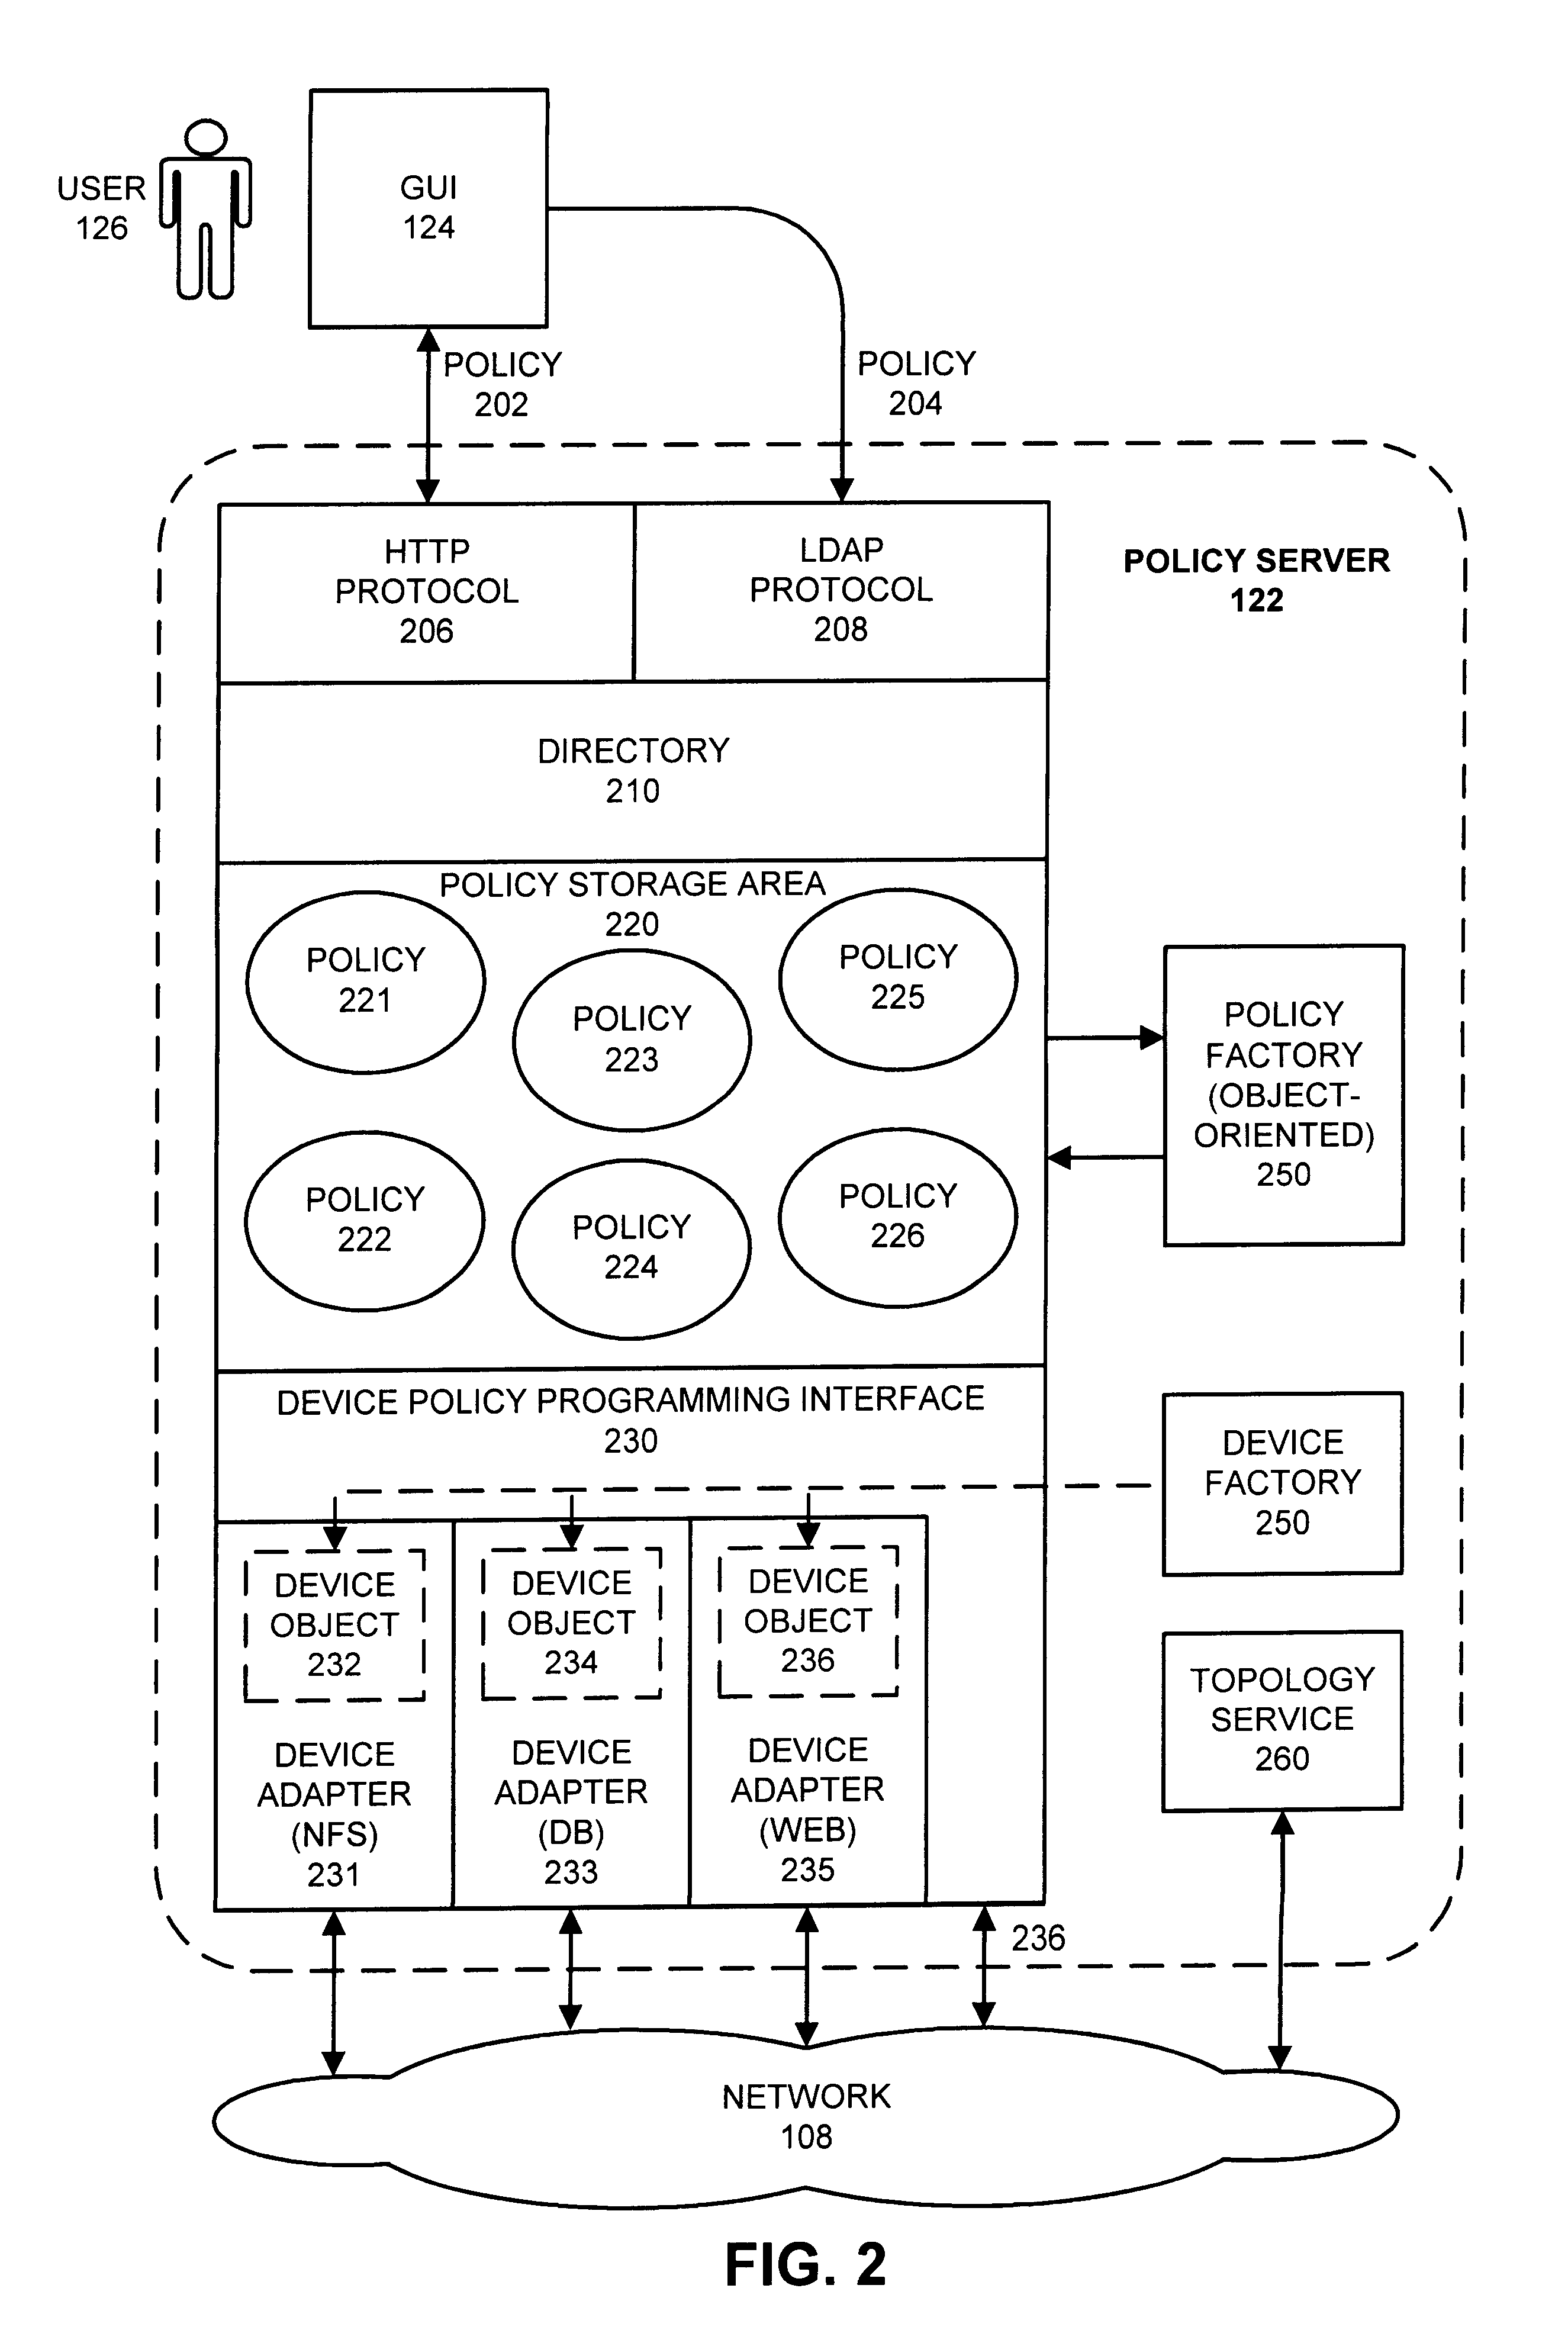 Controlling devices on a network through policies